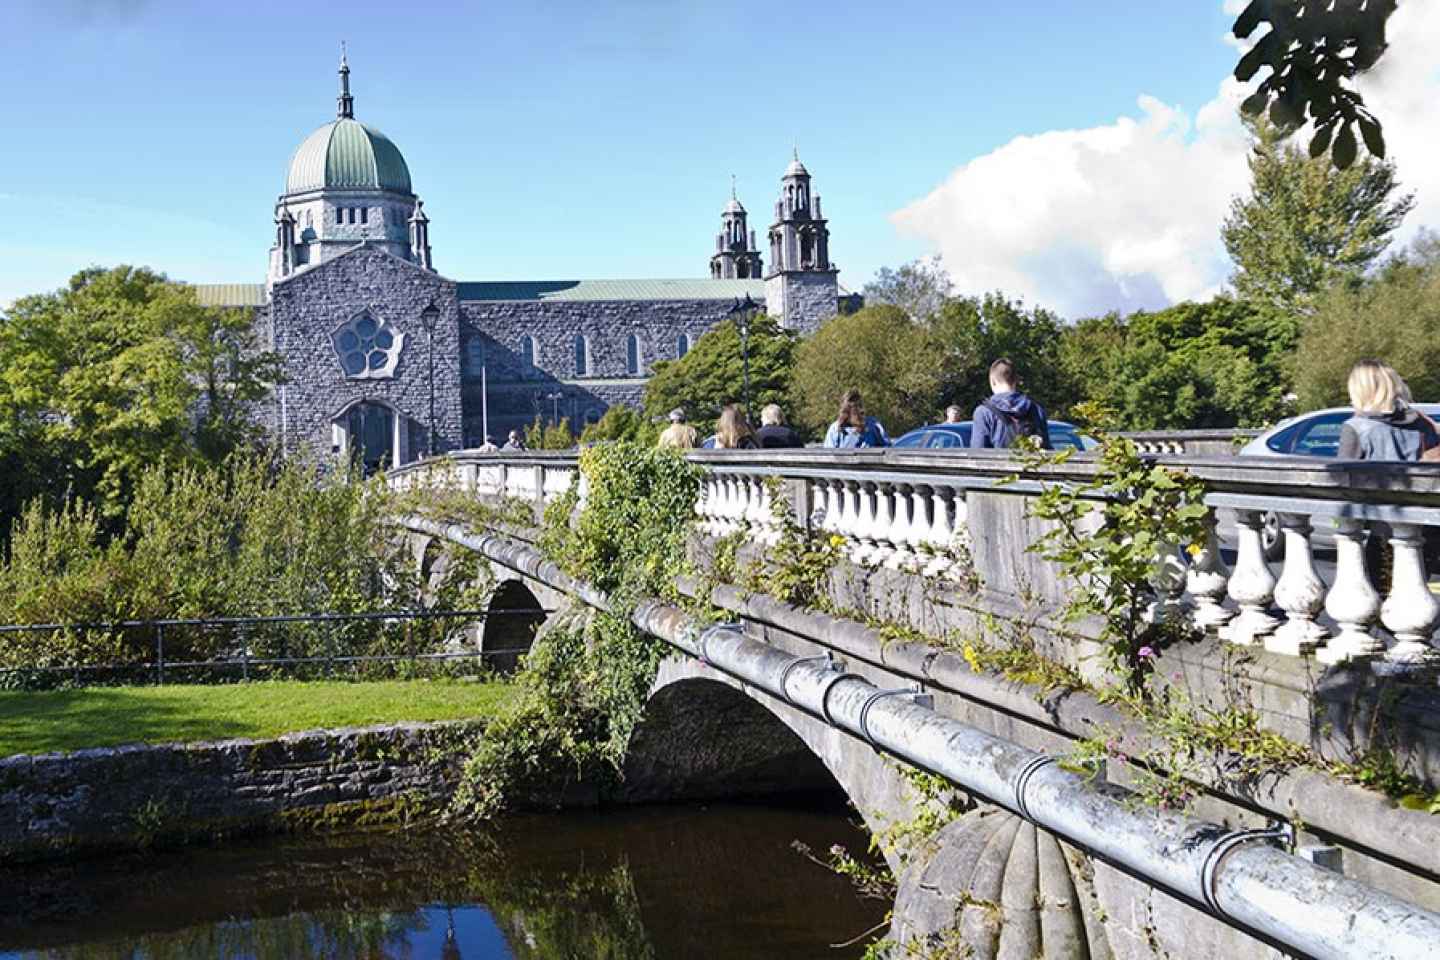 Galway City: Guided 1.5-Hour Walking Tour